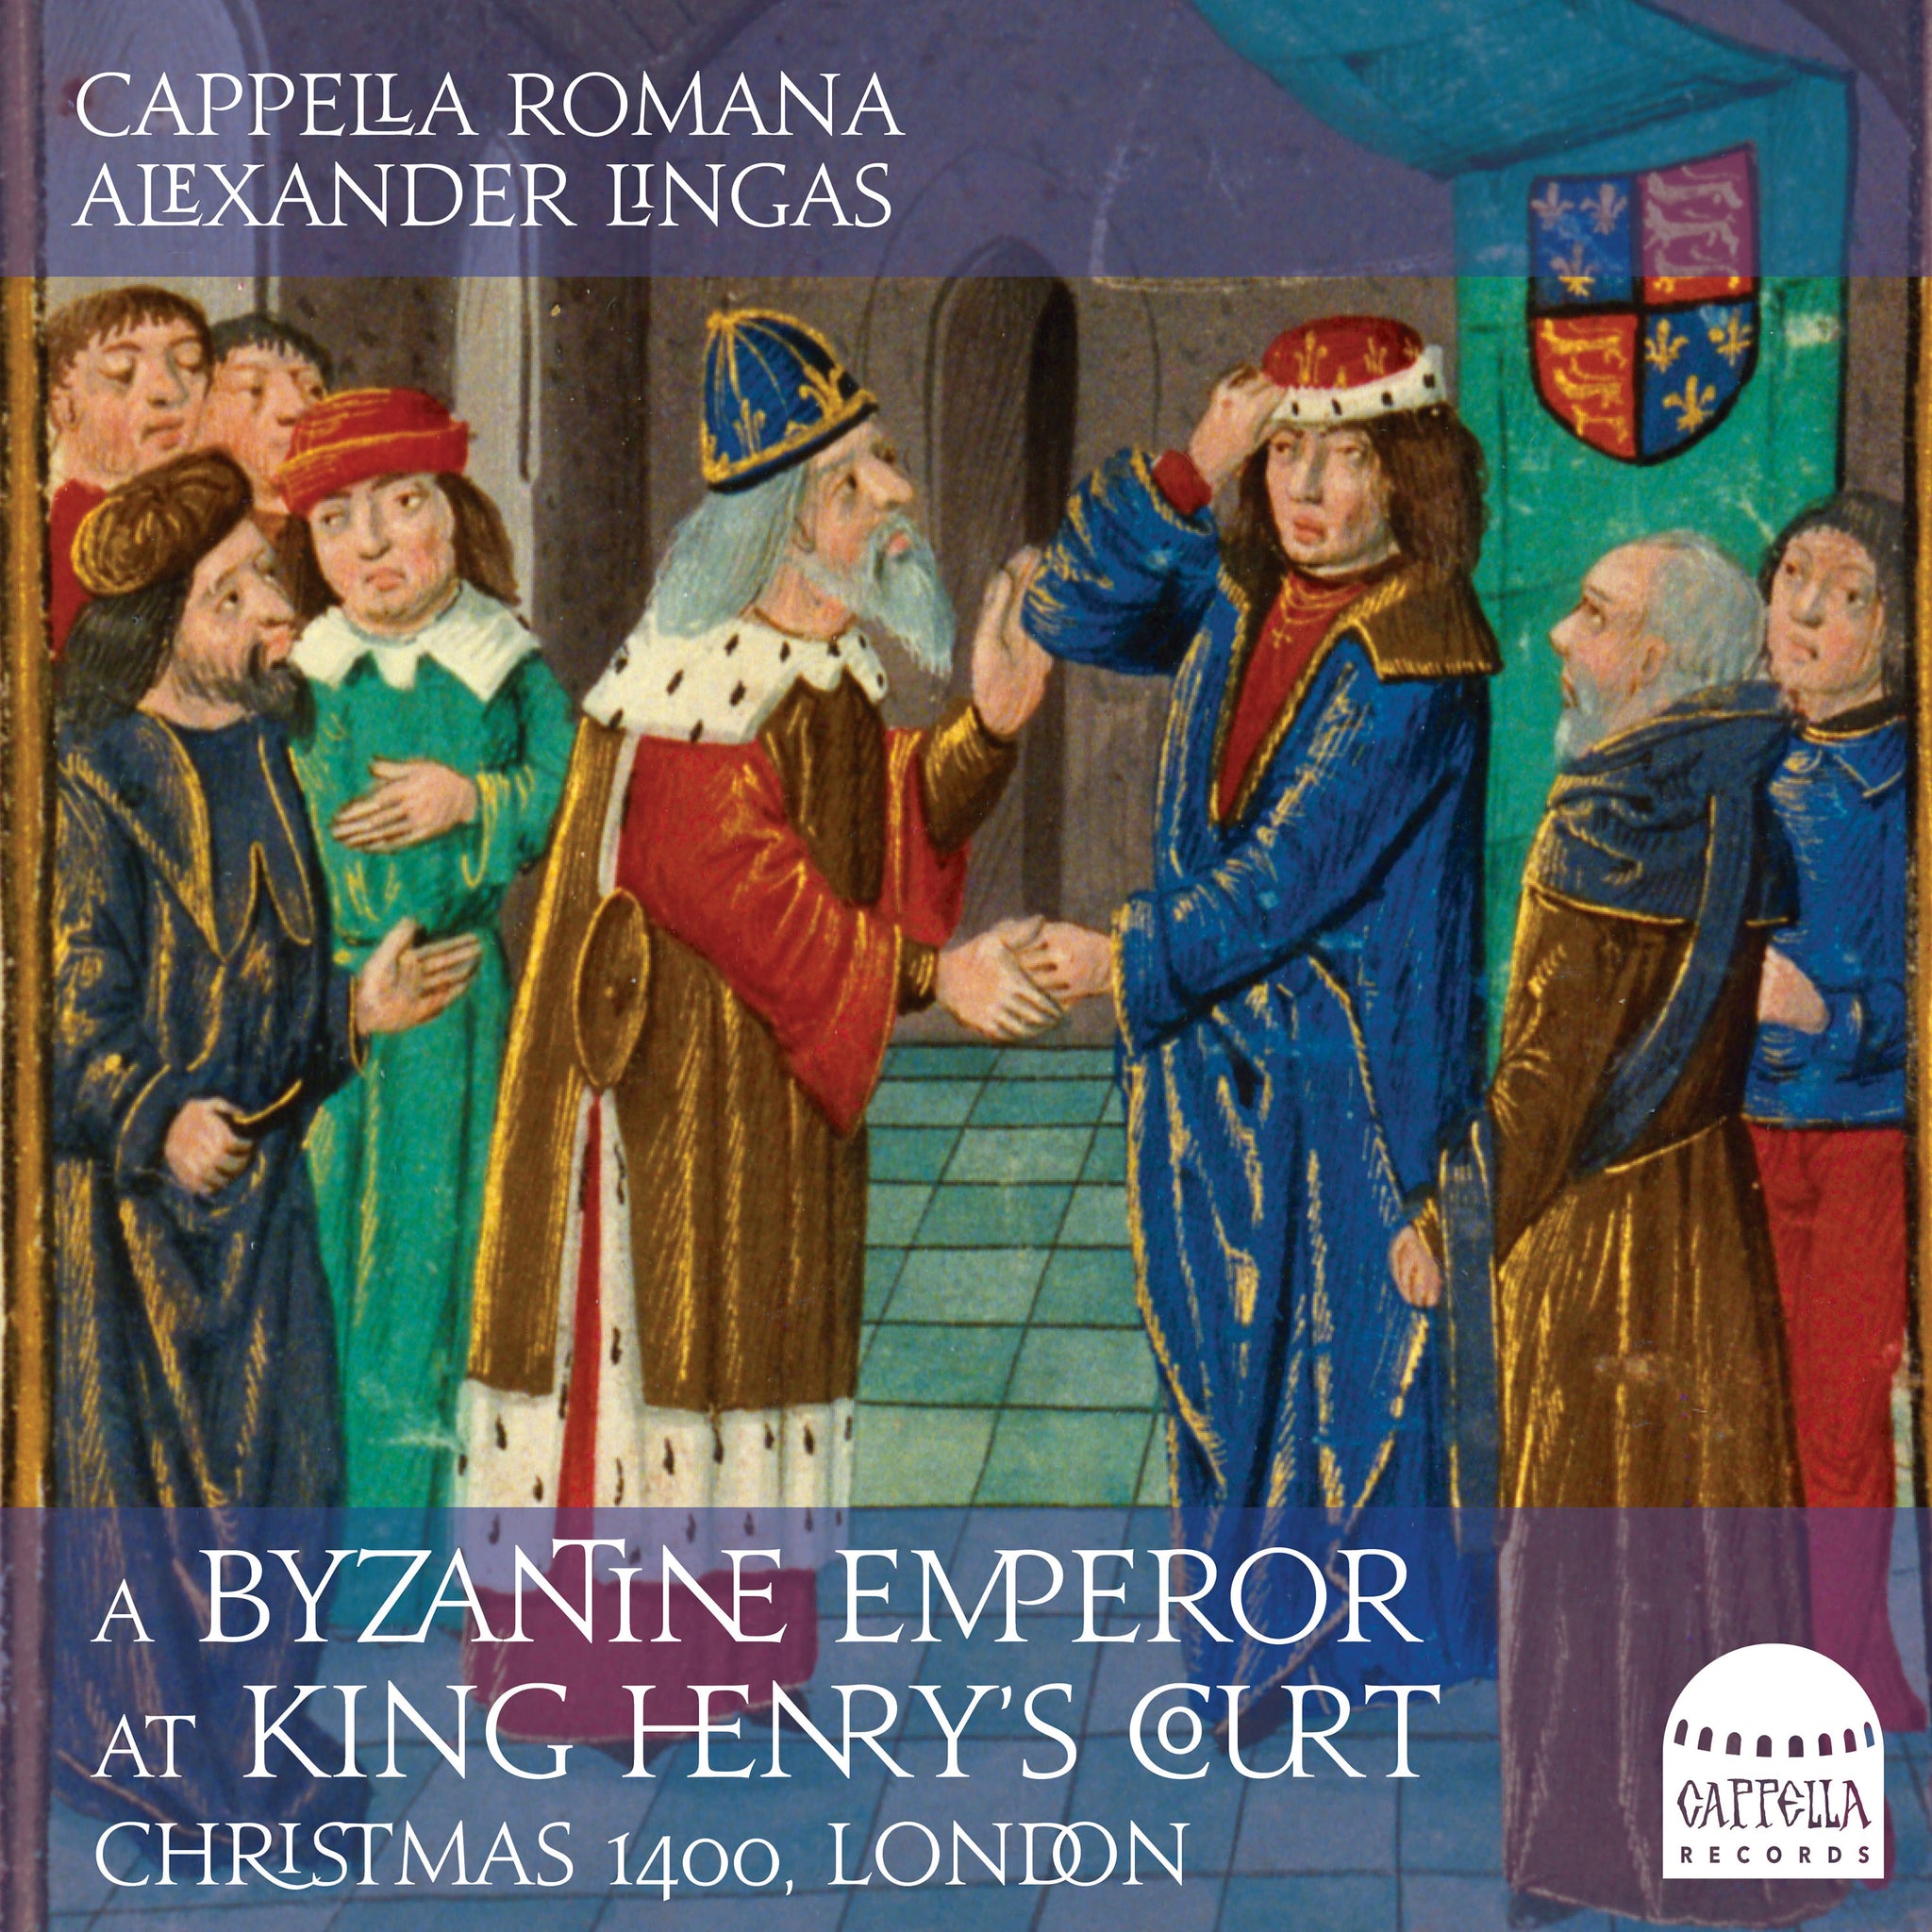 A Byzantine Emperor at King Henry's Court / Lingas, Cappella Romana